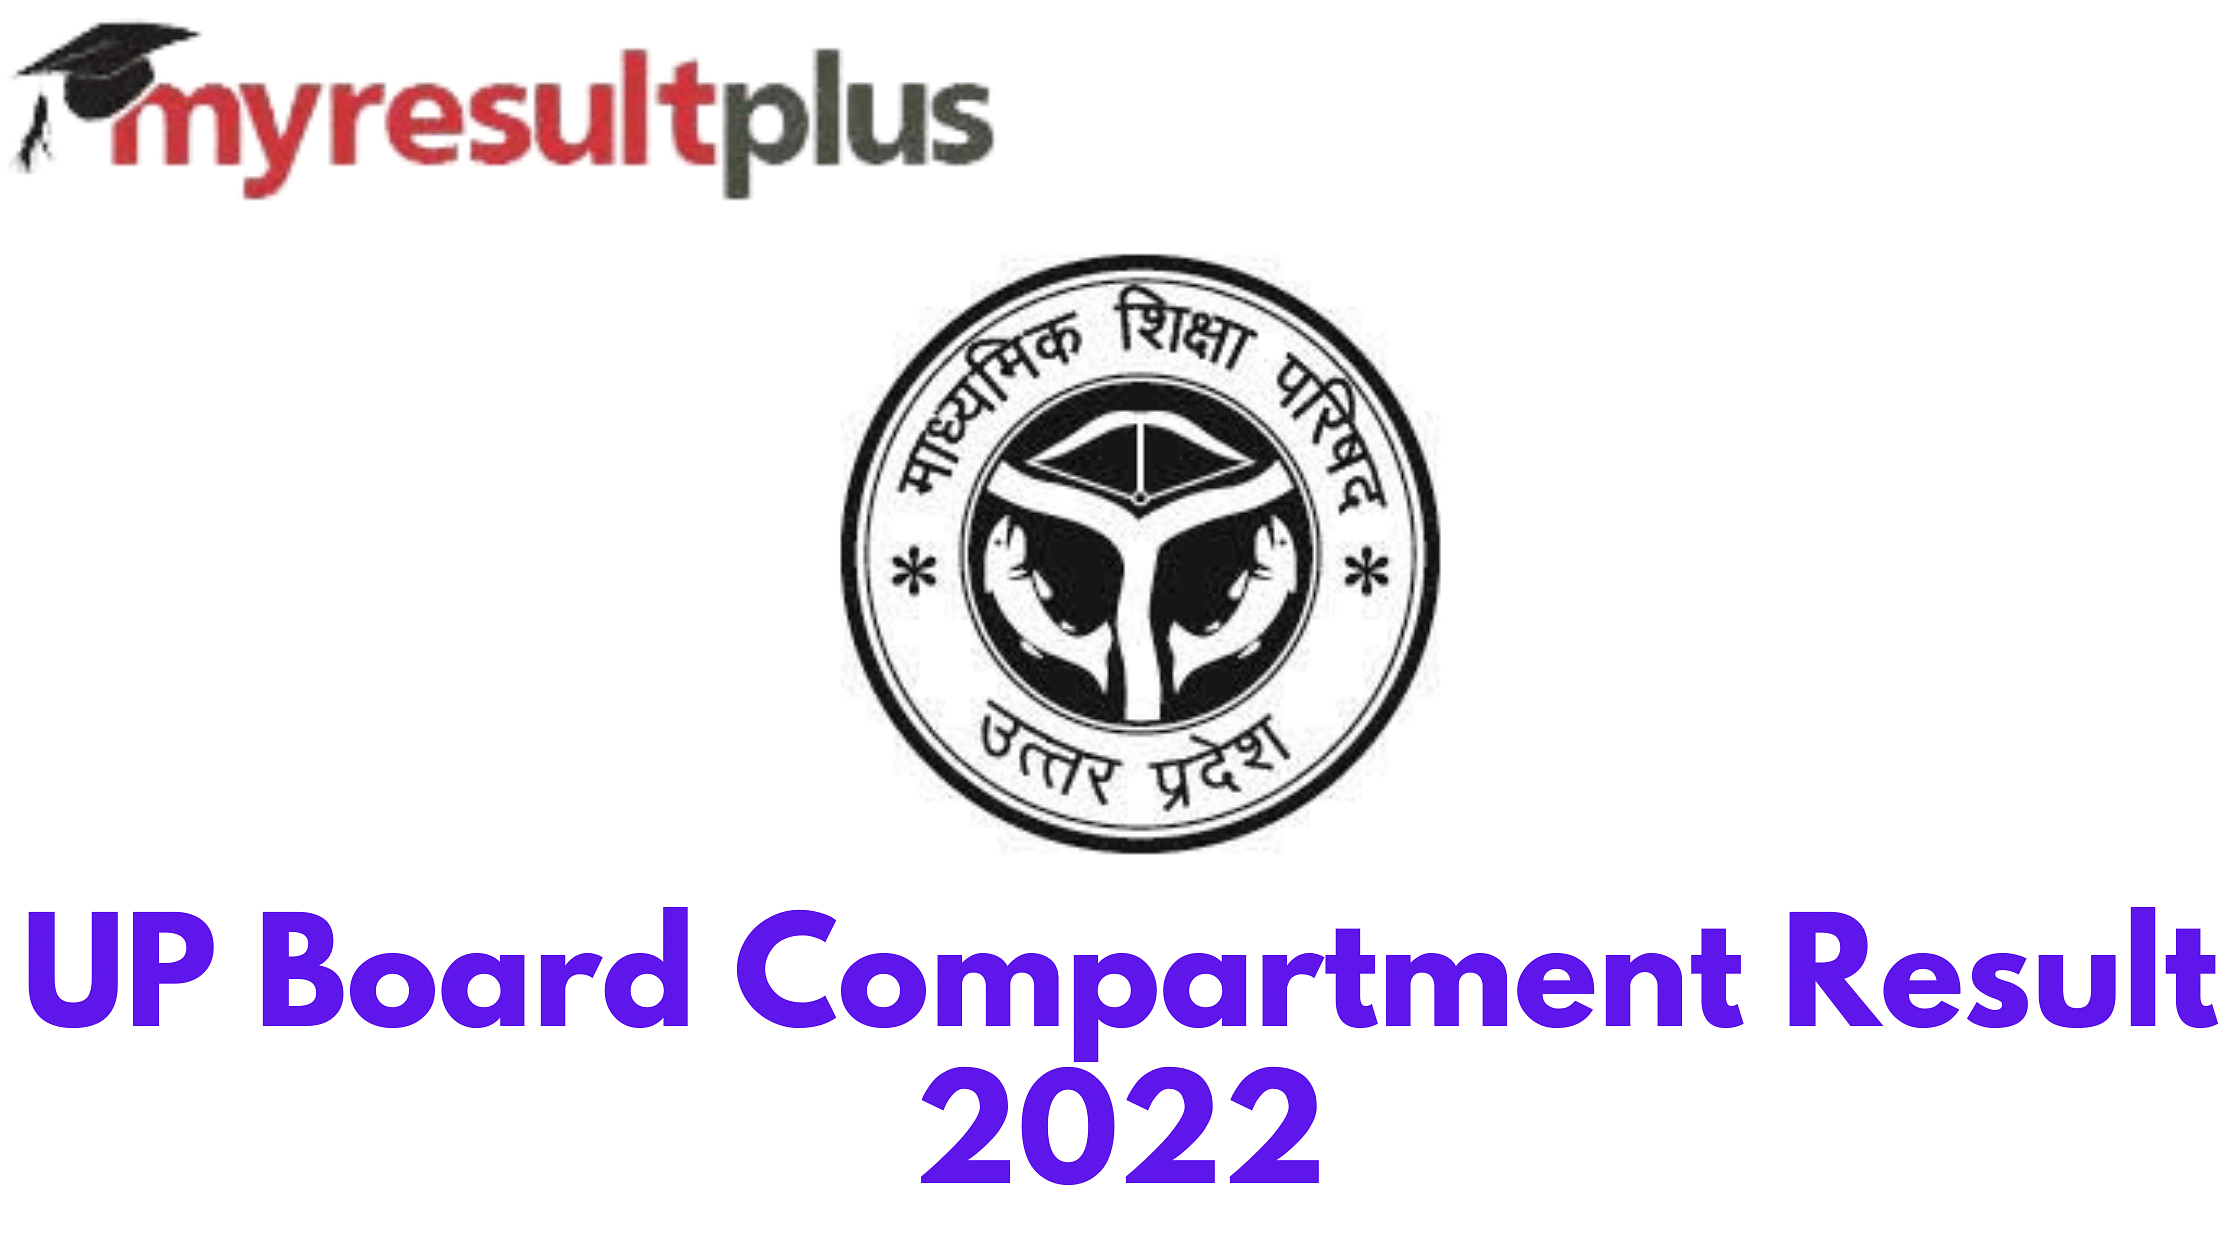 UP Board Compartment Result 2022 Released, Here's Direct Link to Check